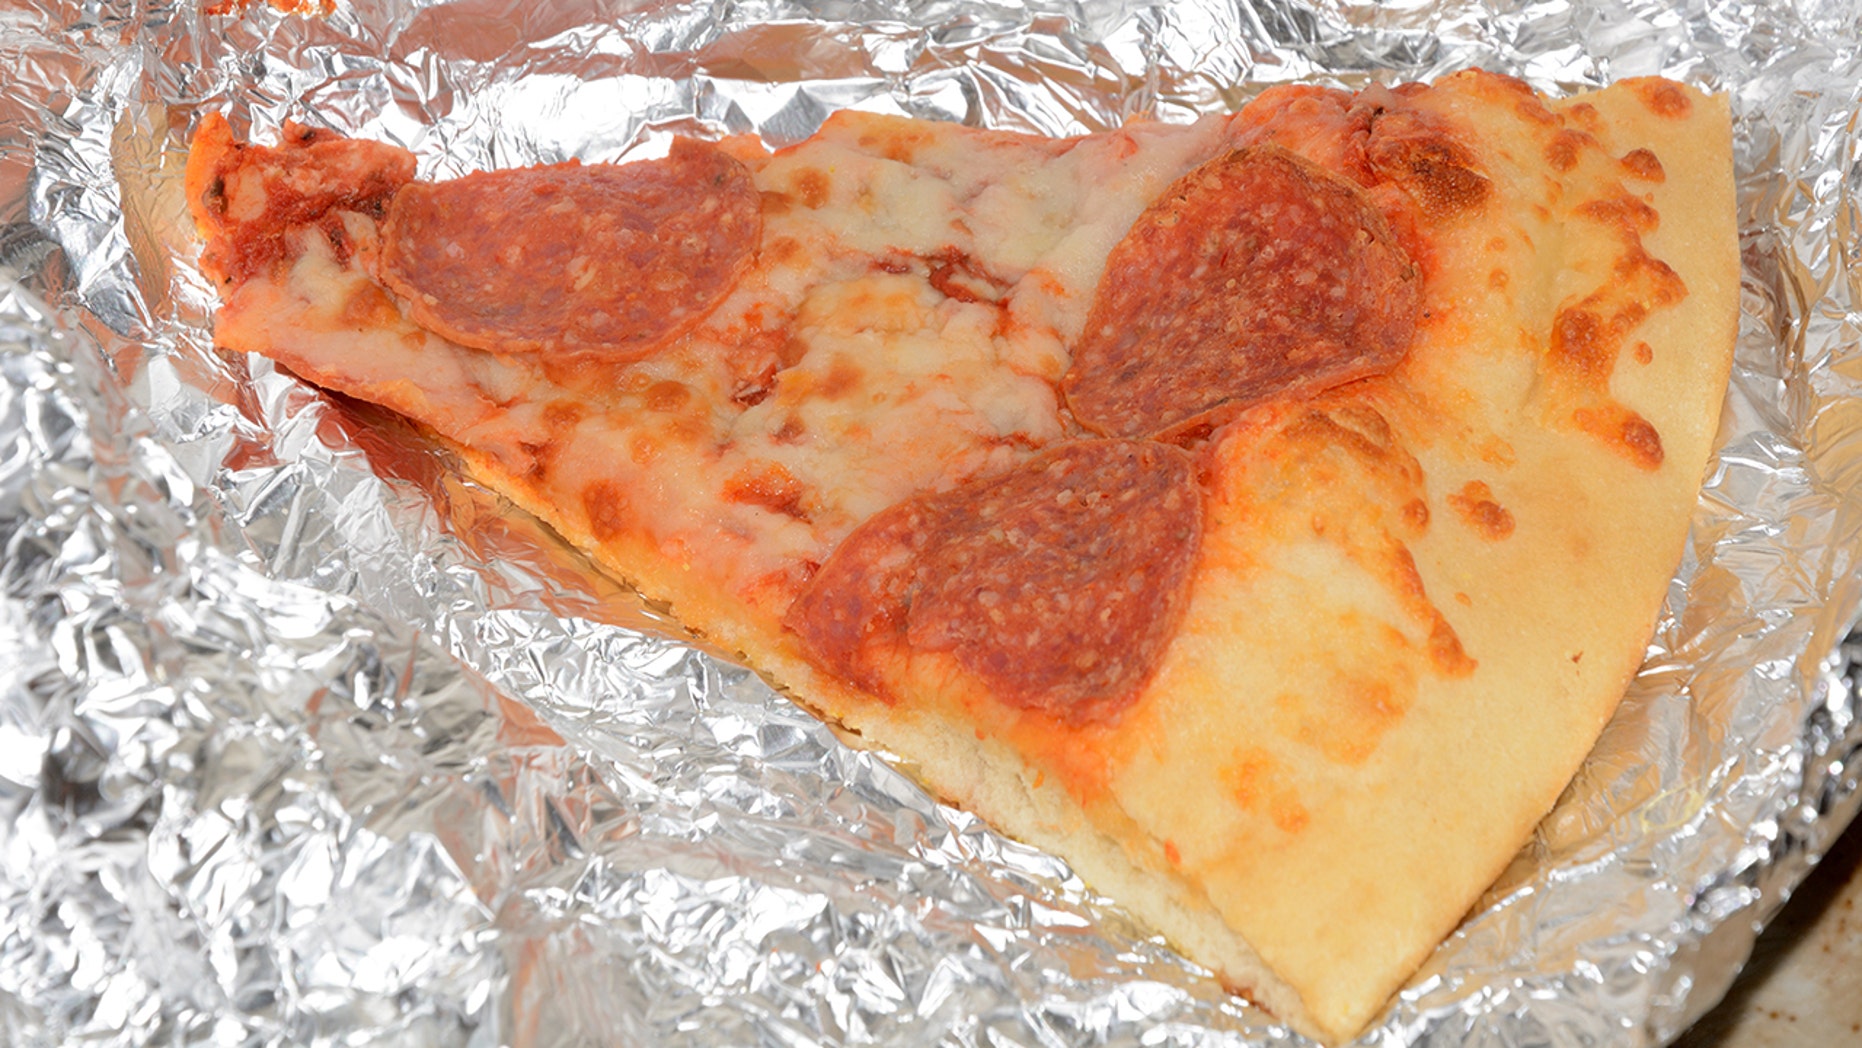 Storing leftovers in aluminum foil can lead to these health risks